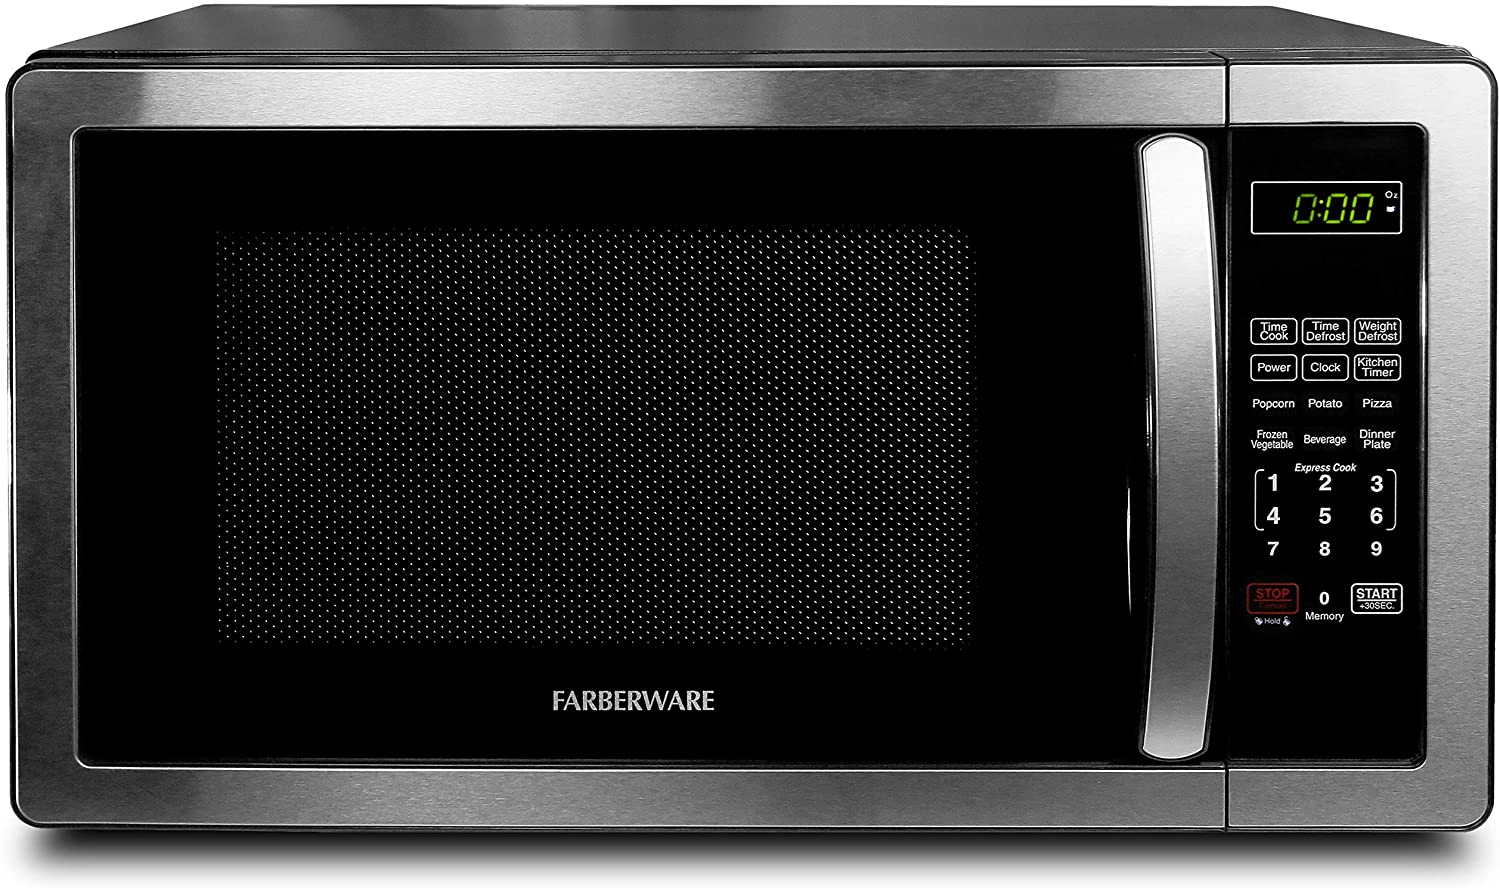 Farberware 1.1 Cu. Ft. Stainless Steel Countertop Microwave Oven With 6 Cooking Programs, LED Lighting, 1000 Watts - image 1 of 10